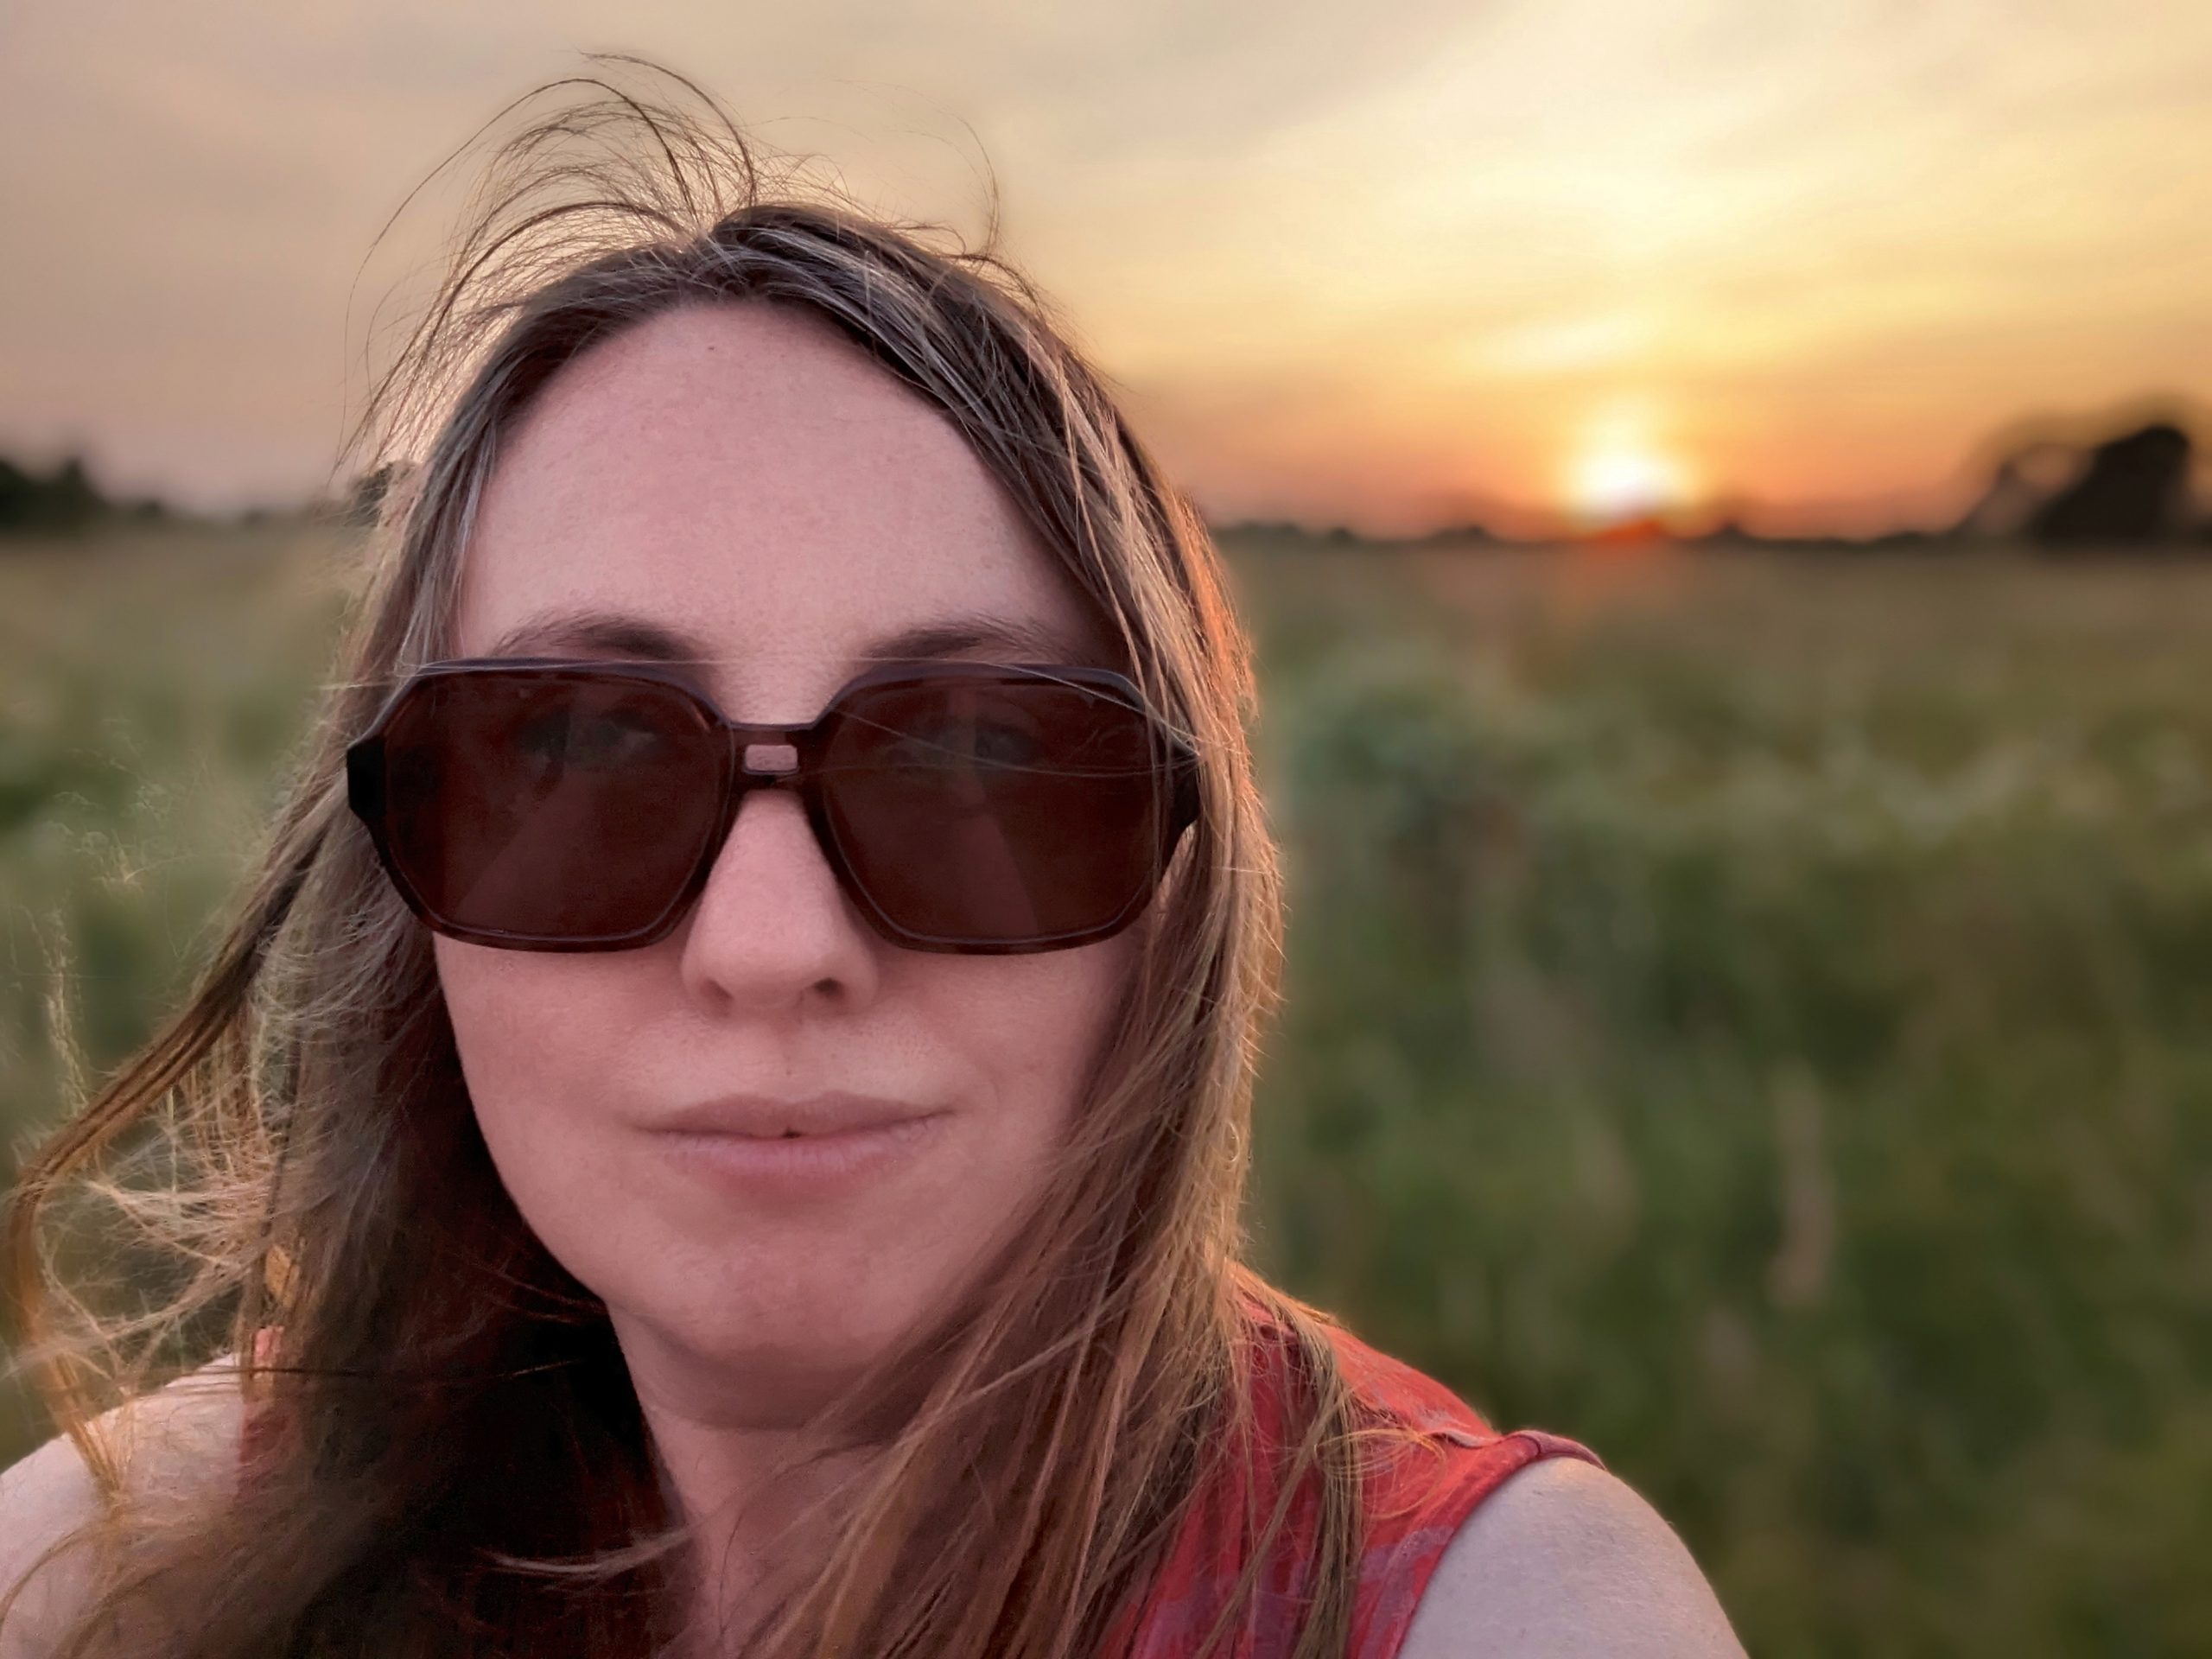 Selfie - woman in sunglasses with sun setting over field in background